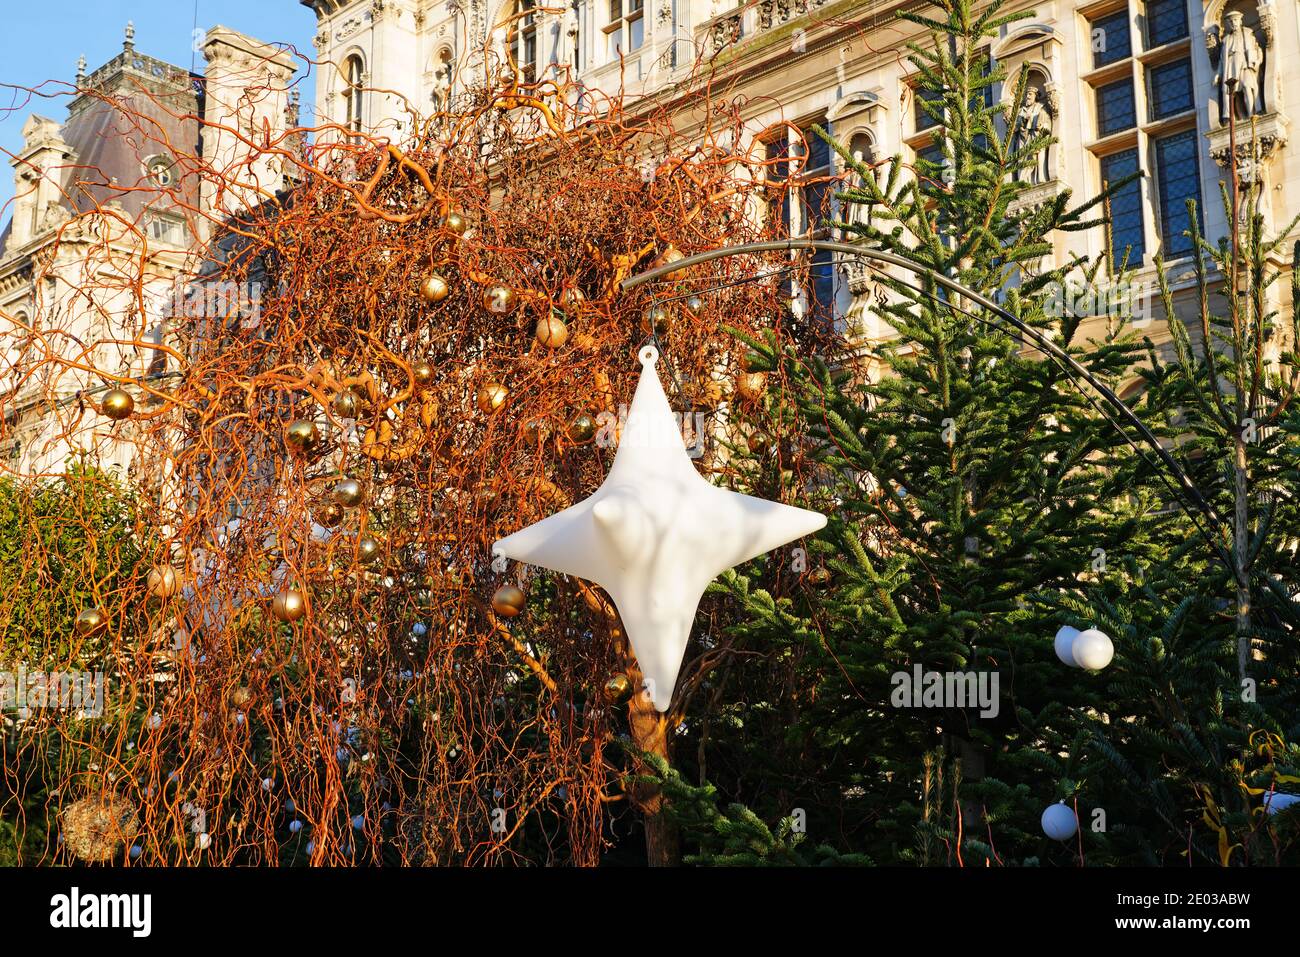 PARIS, FRANCE -18 DEC 2020- Christmas decorations in front of the Hotel de Ville (City Hall), in the 4th arrondissement of Paris. The mayor is sociali Stock Photo